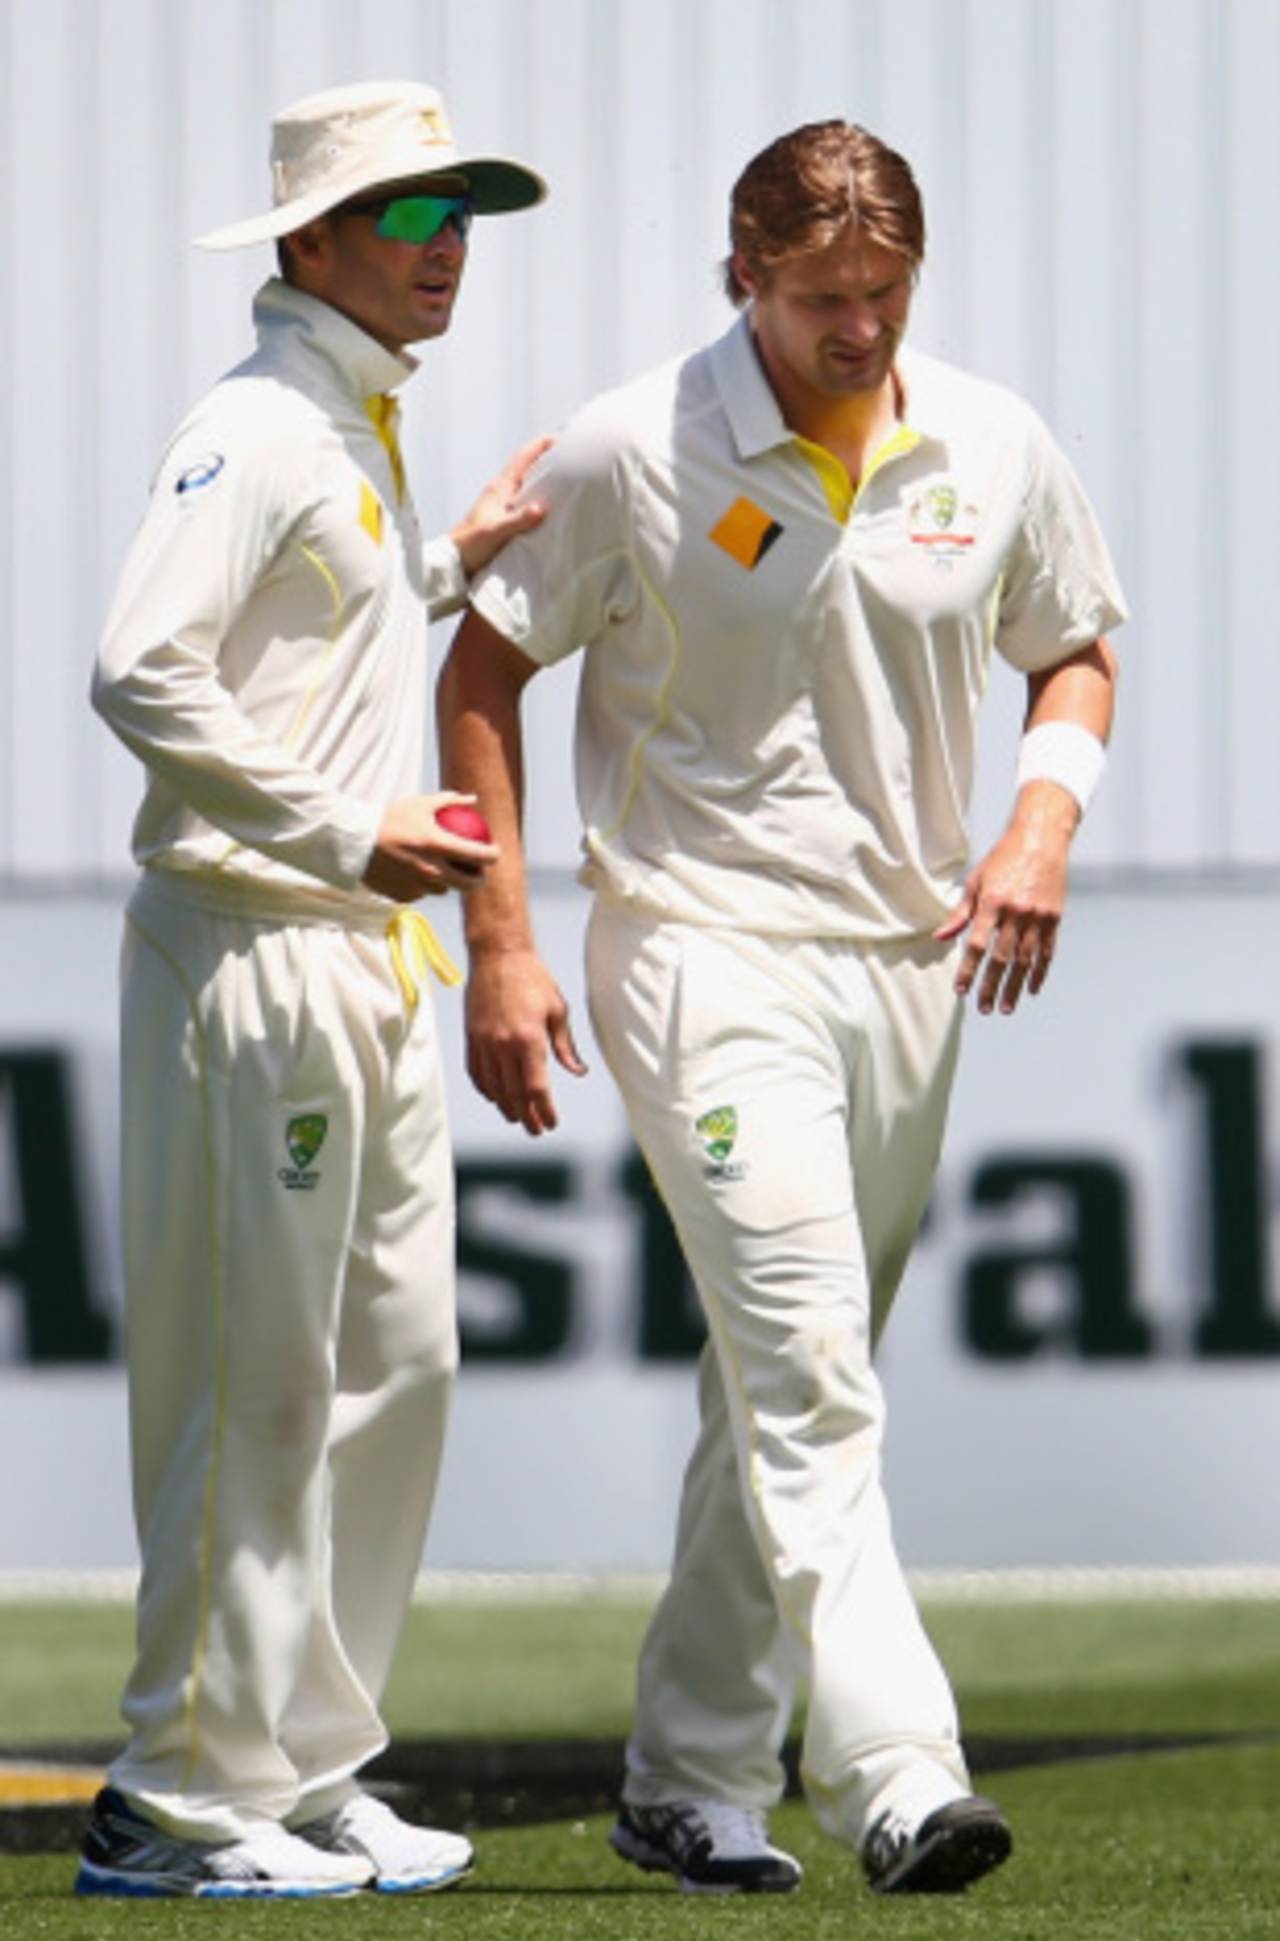 Shane Watson limped off during his seventh over, Australia v England, 4th Test, Melbourne, 1st day, December 26, 2013